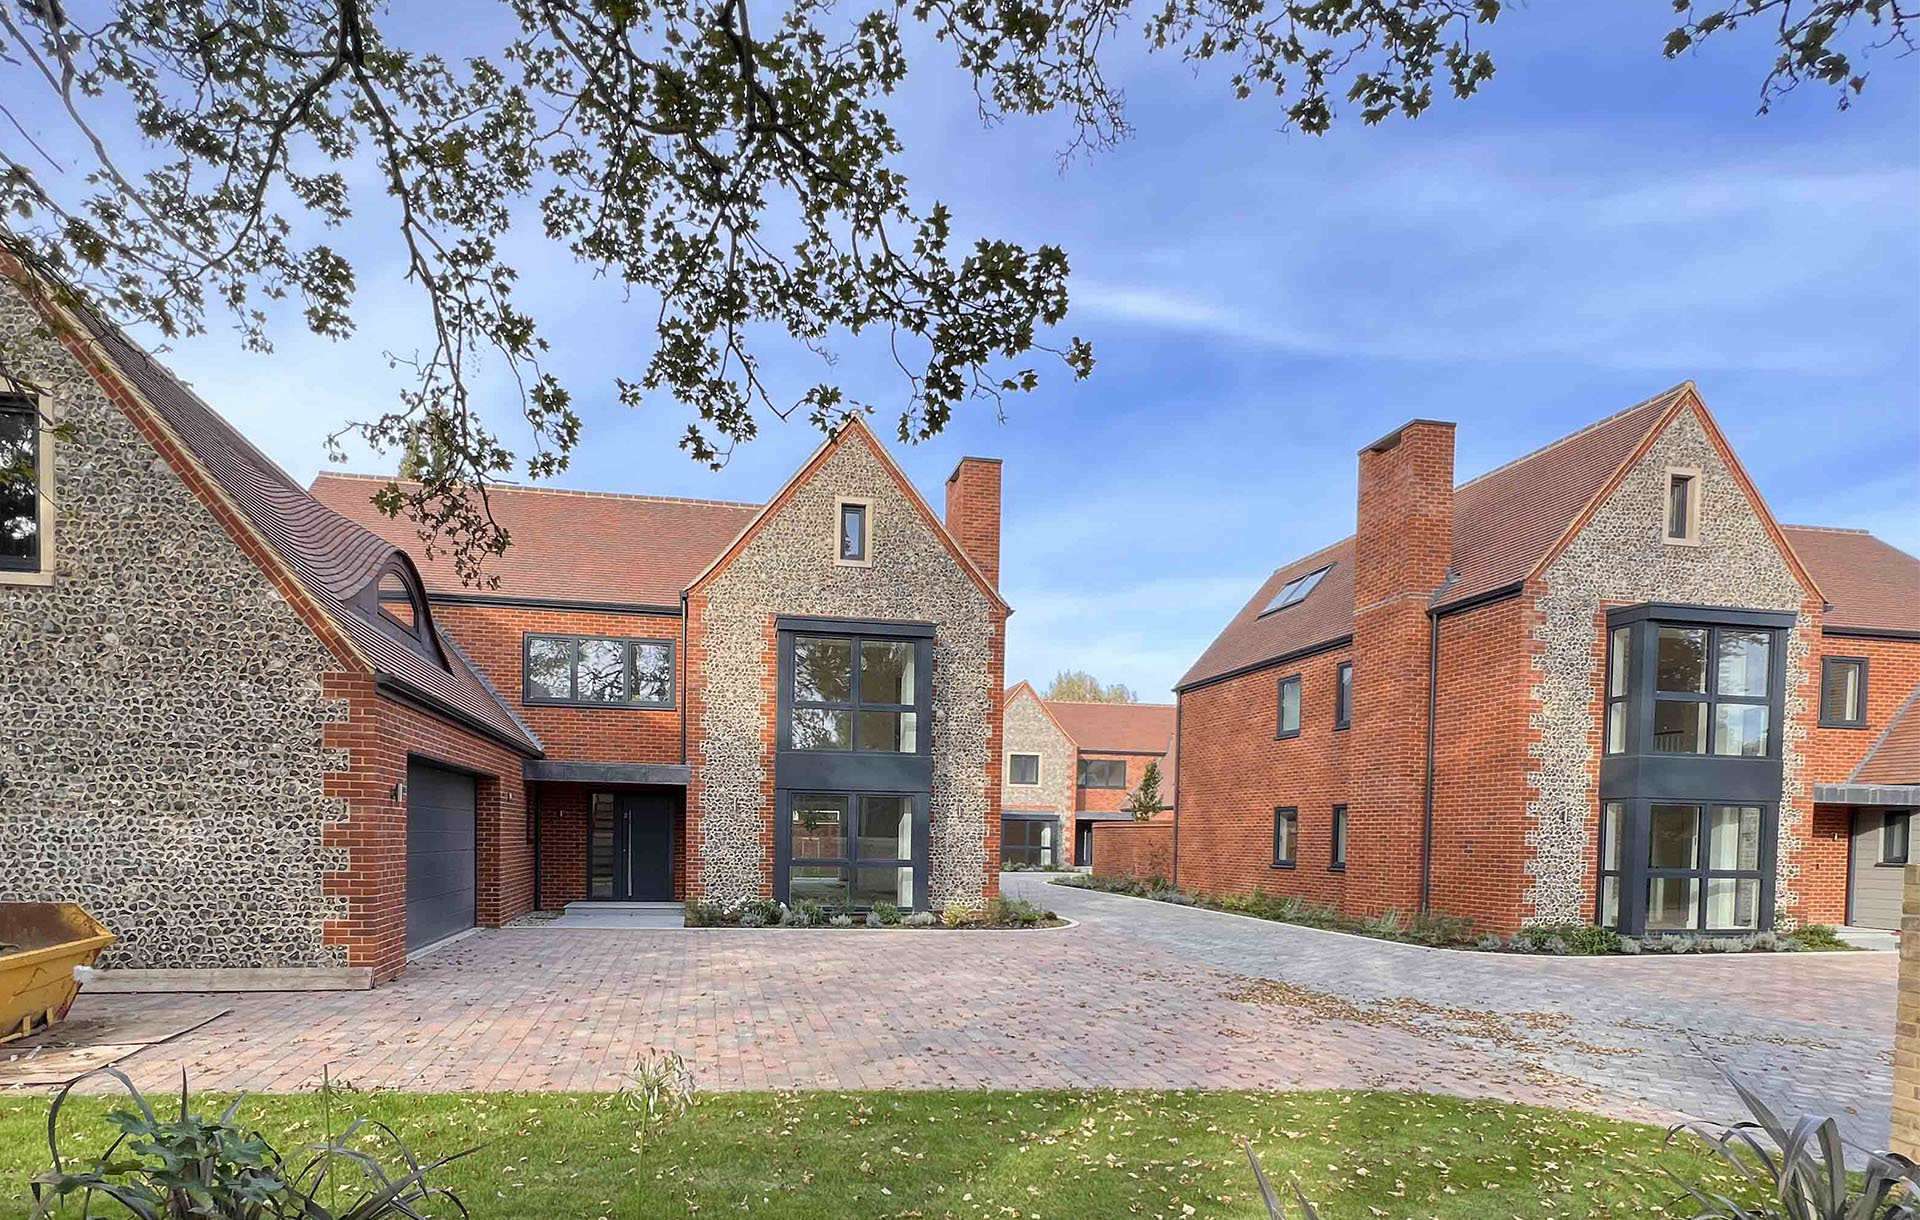 a small high end development in Cambridgeshire by NP Architects with Dreadnought sandfaced country brown tiles